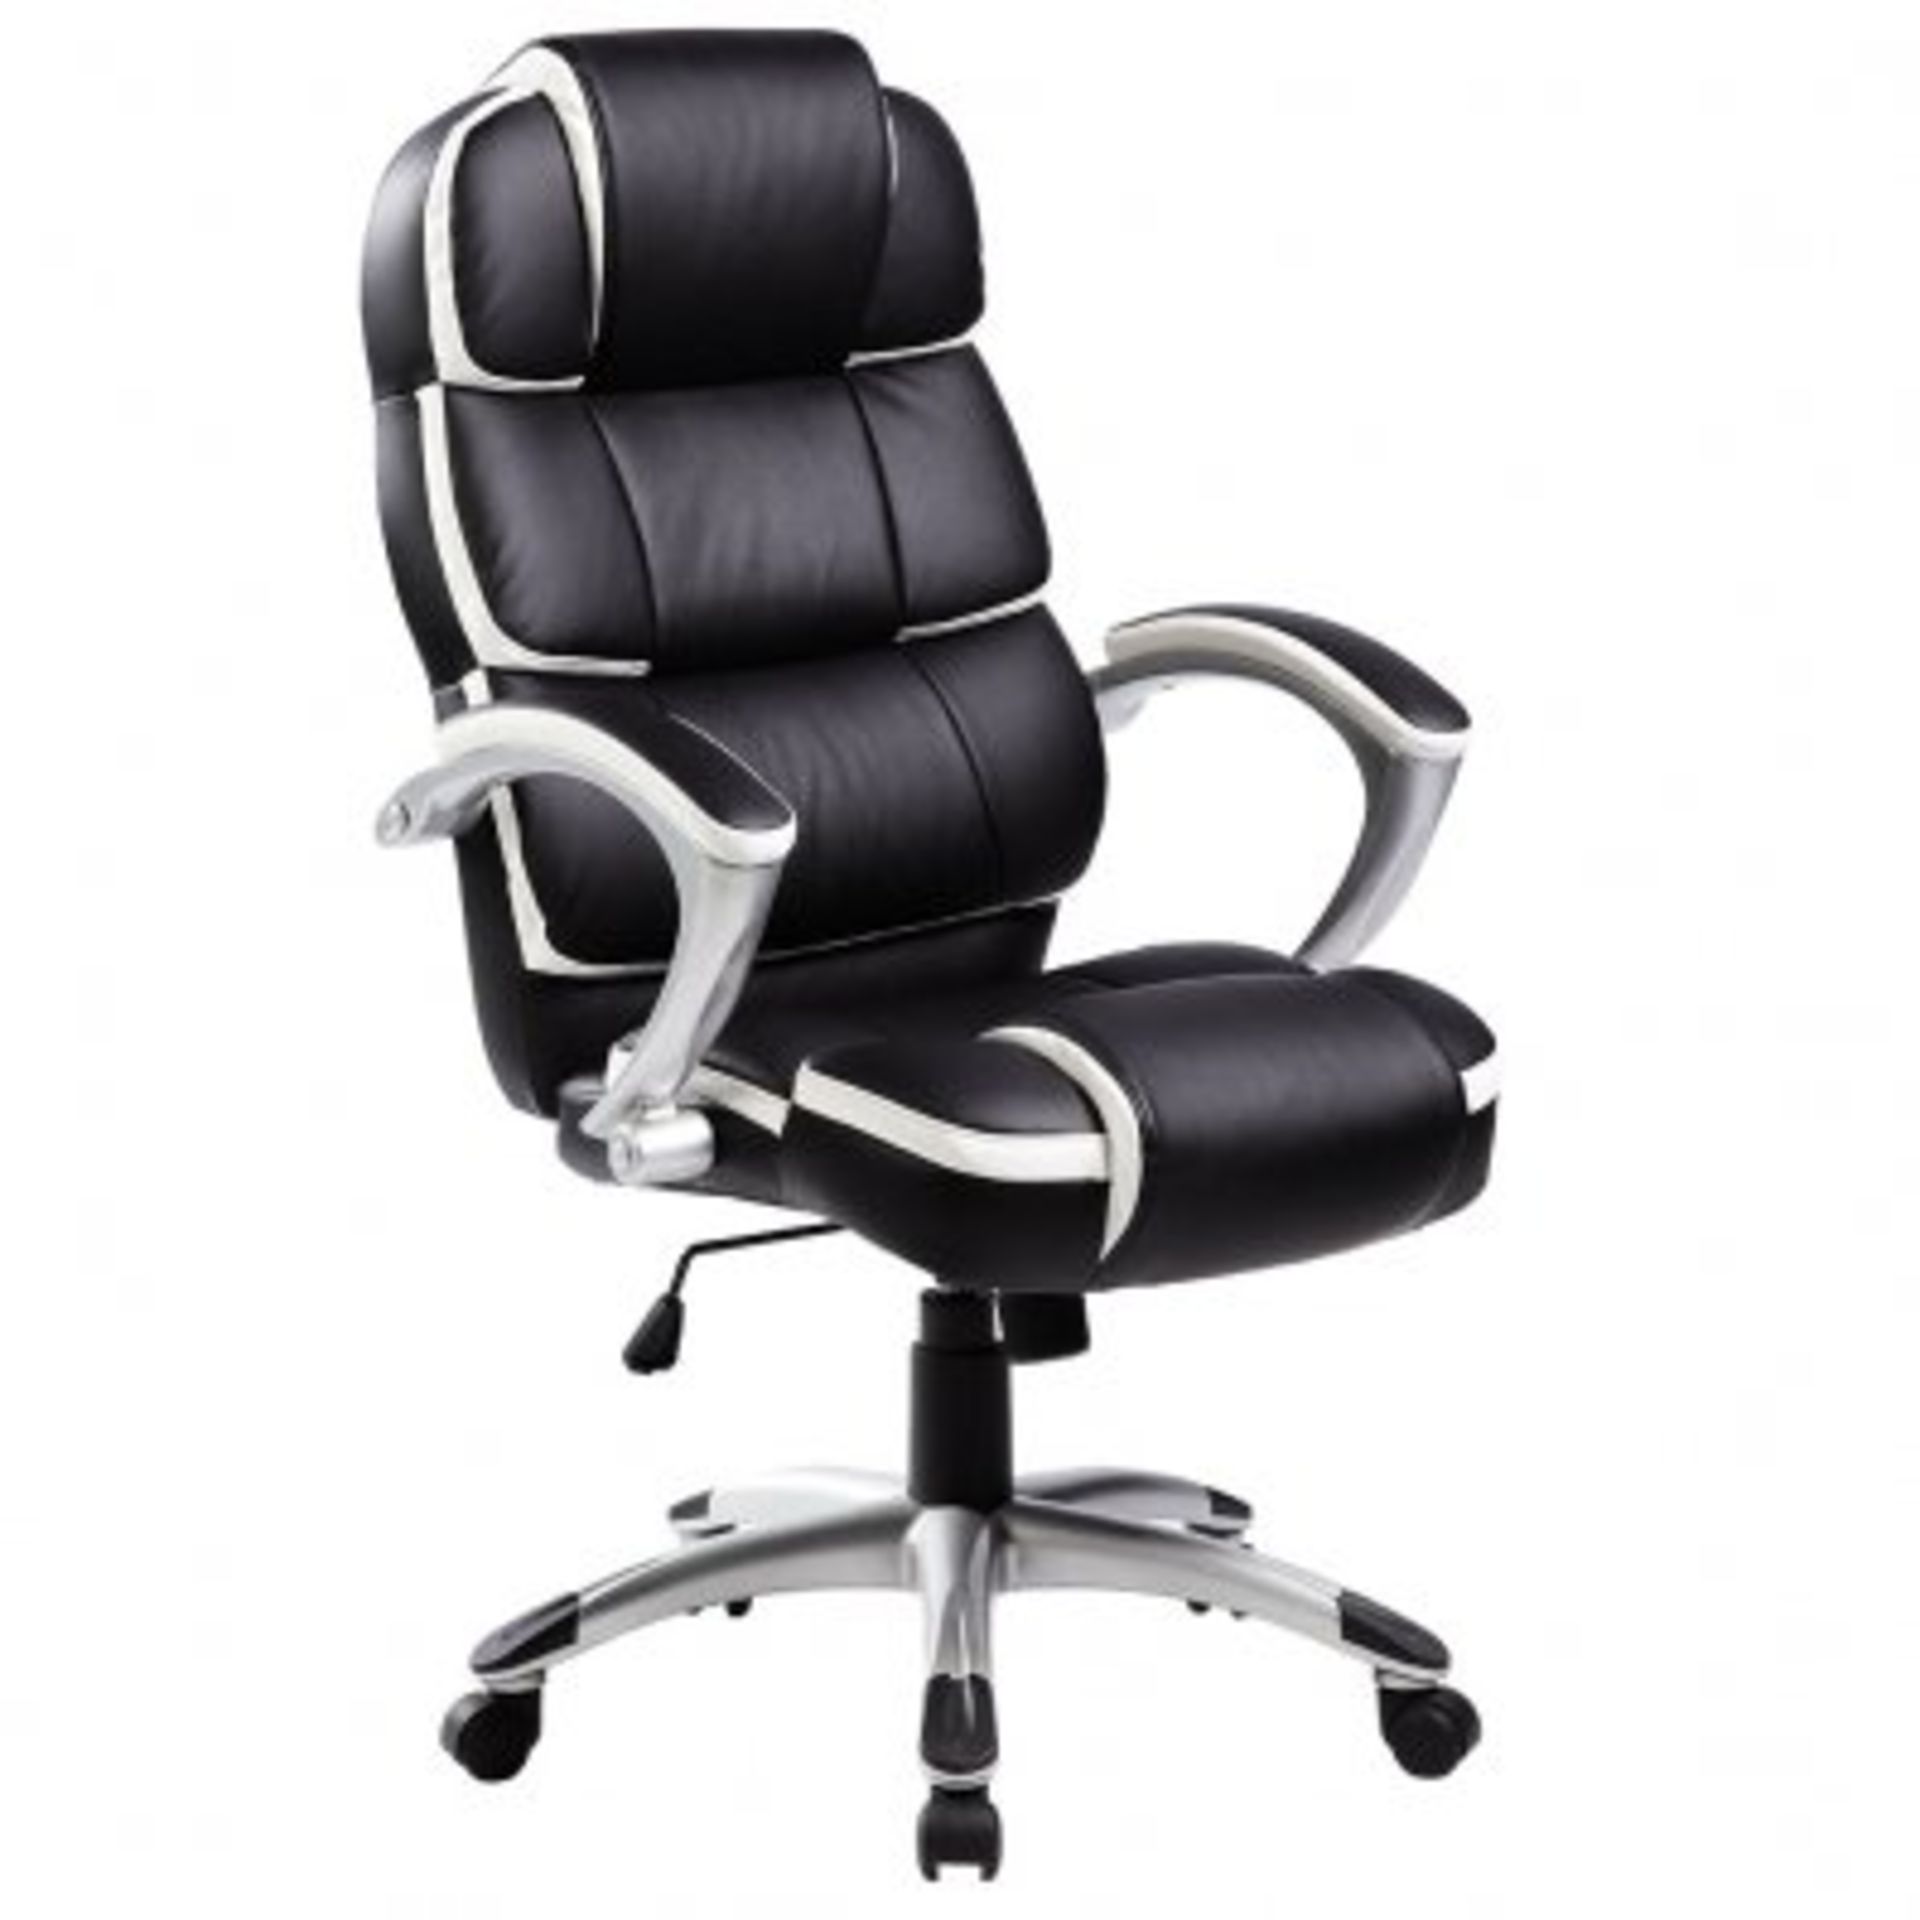 (KK202) Luxury Designer Computer Office Chair - Black with White Accents Our renowned high...